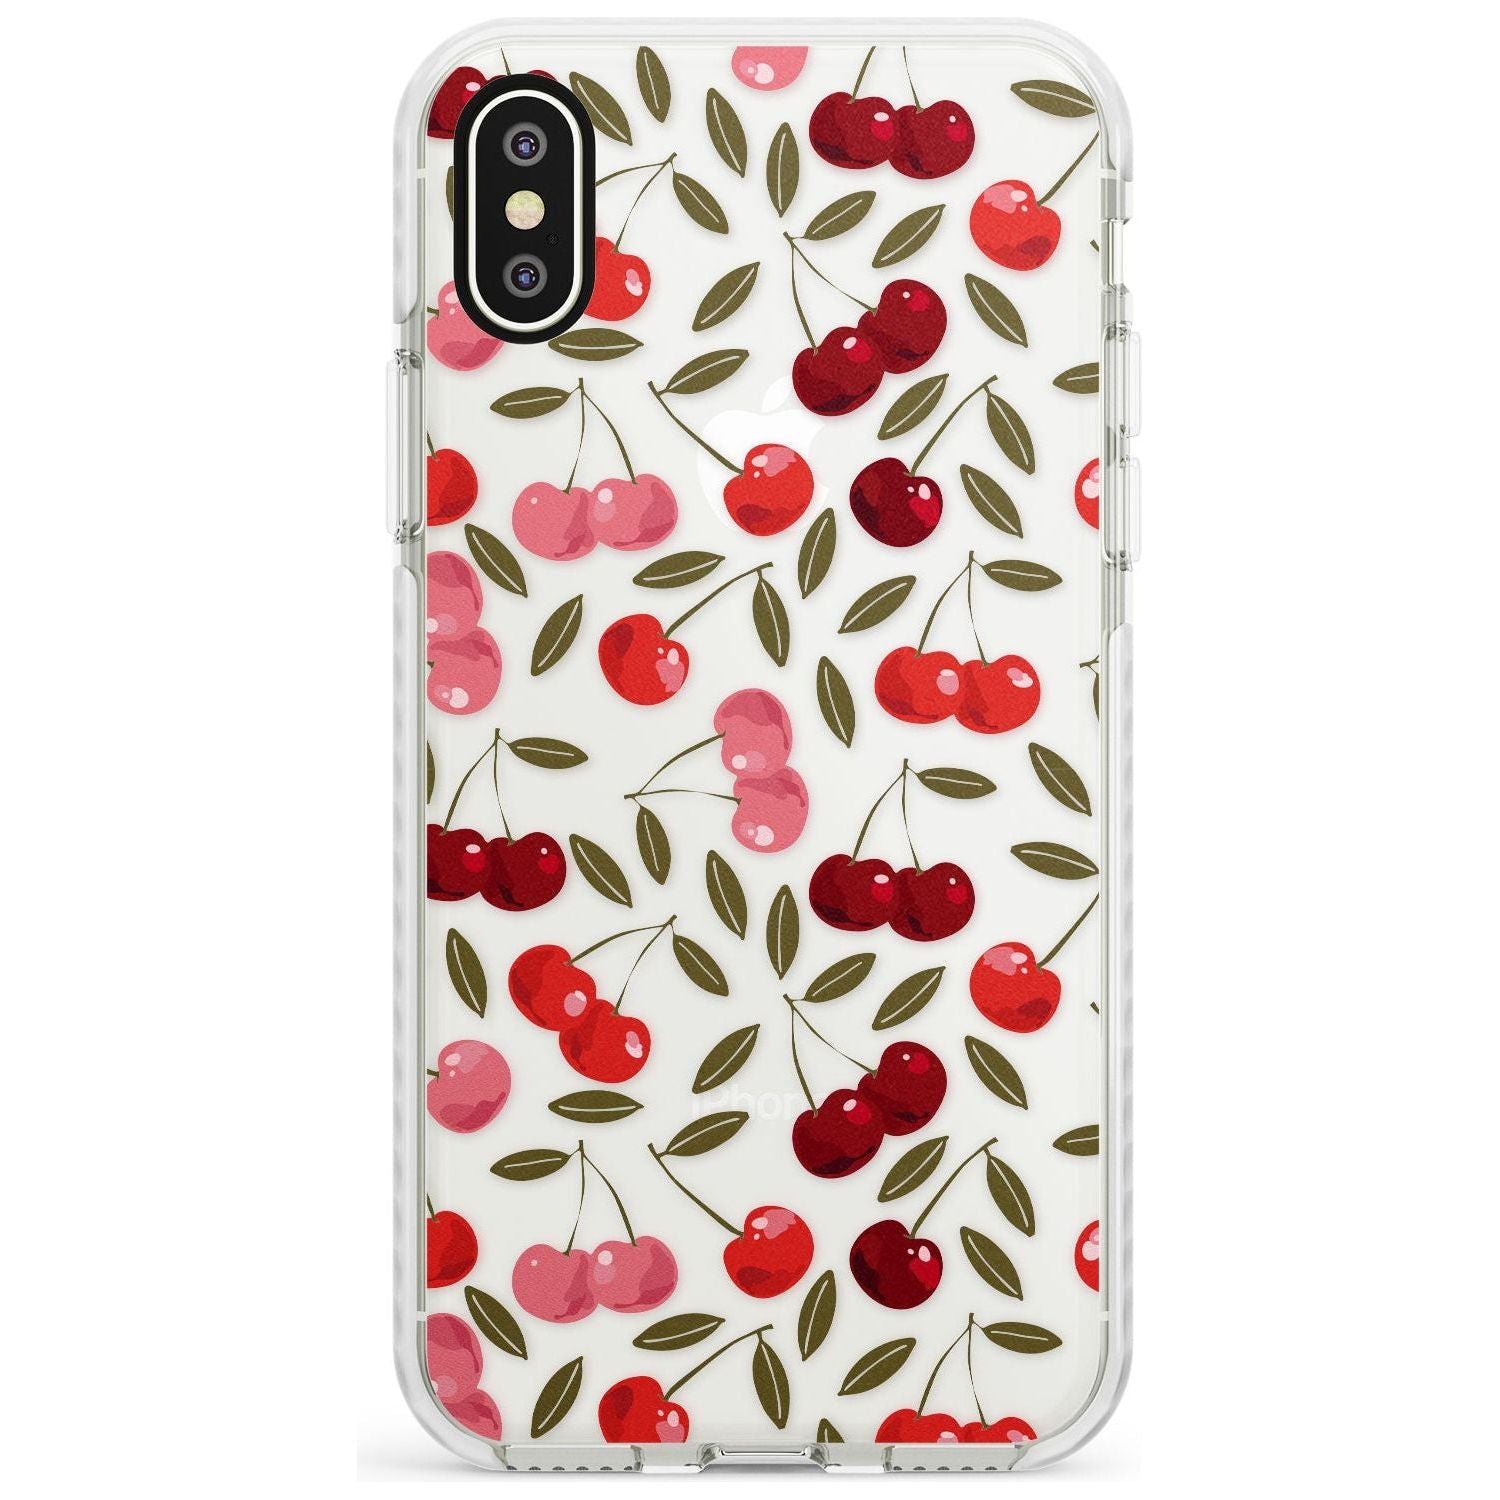 Cherry on top Impact Phone Case for iPhone X XS Max XR